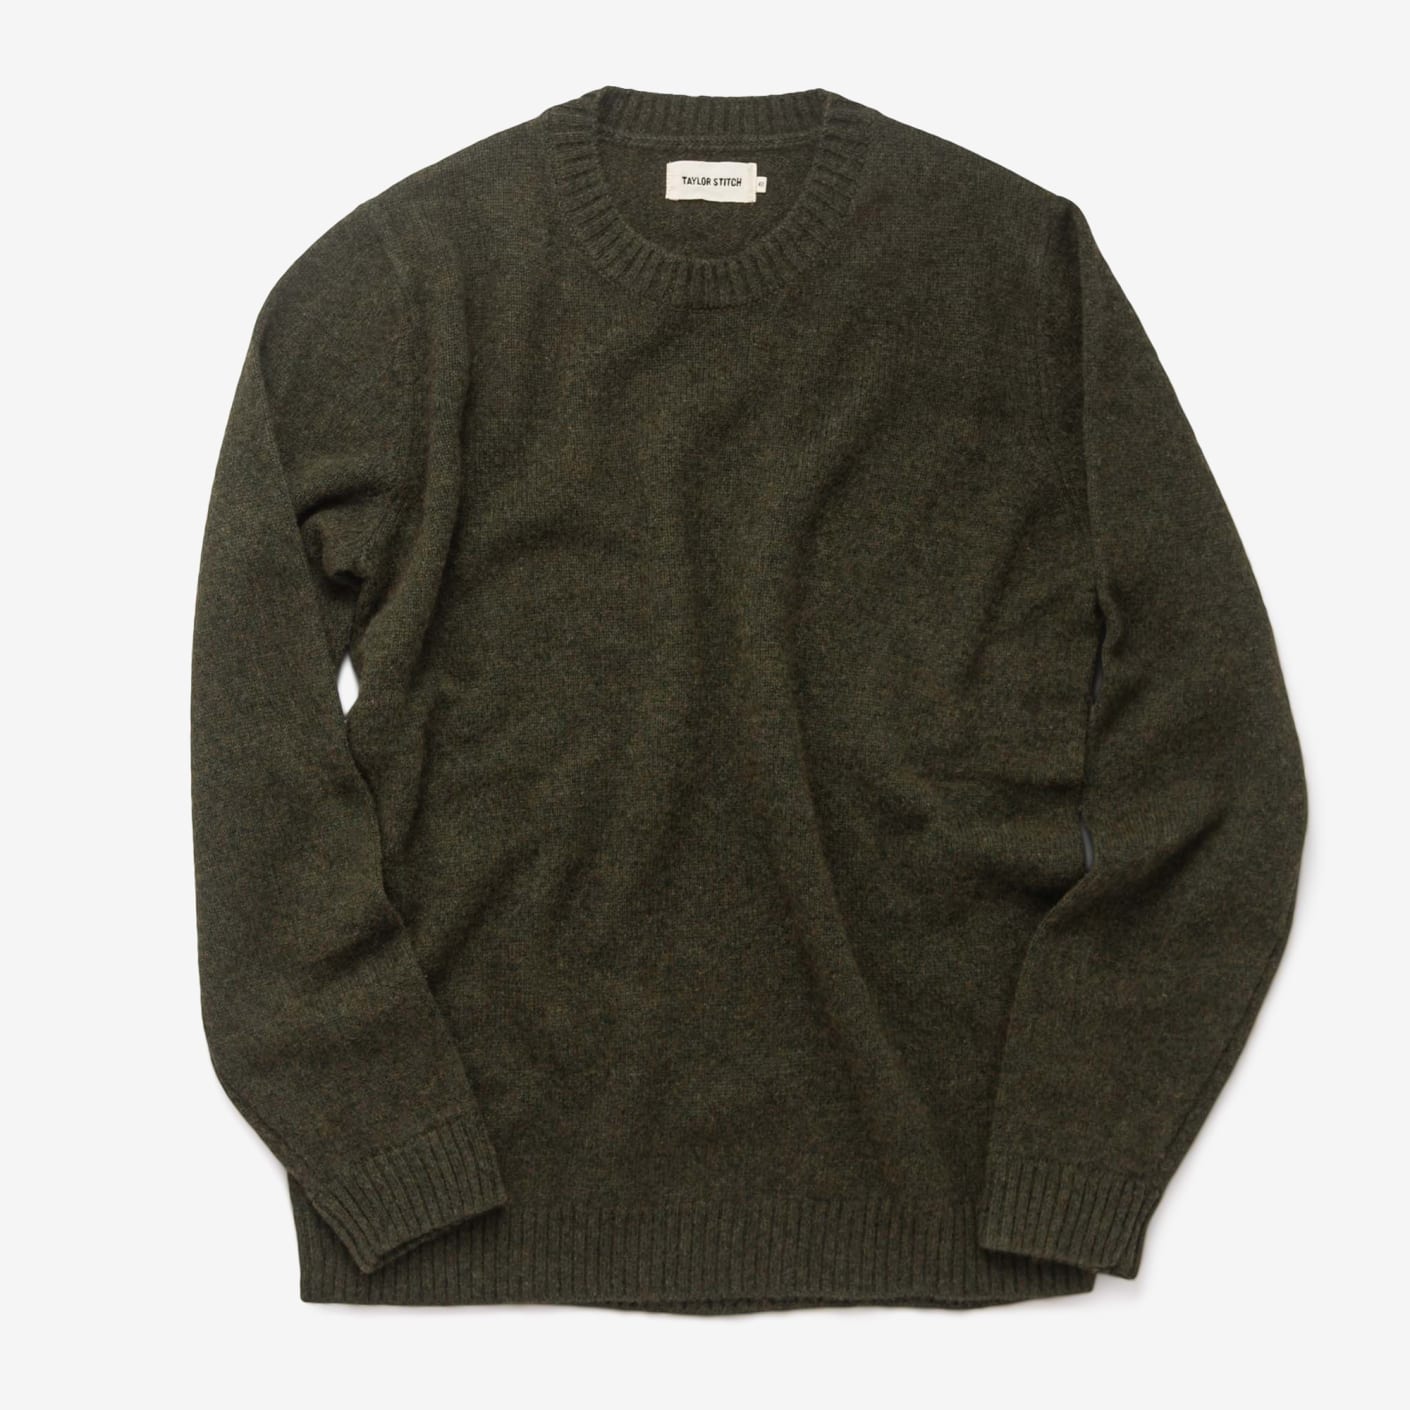 Taylor Stitch The Lodge Sweater, Heather Forest | Bespoke Post